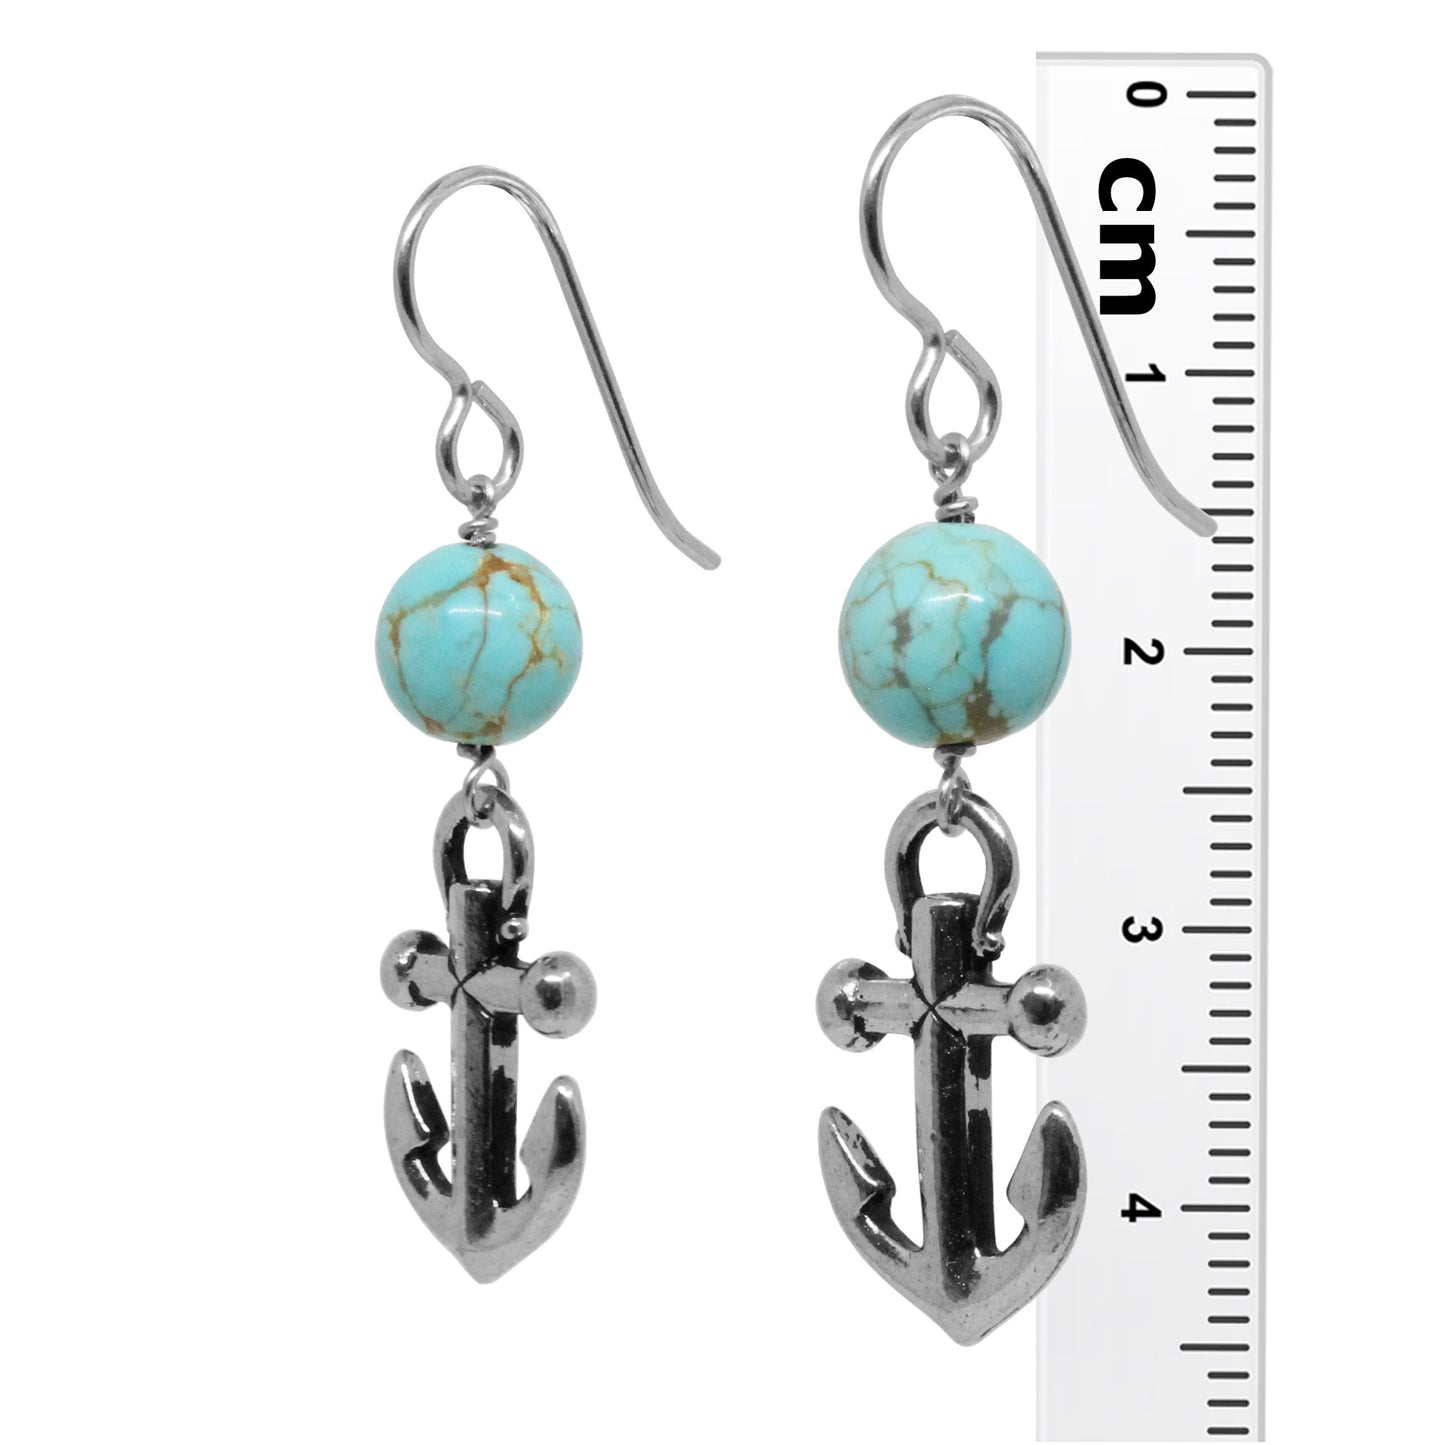 Turquoise Island Anchor Earrings / 45mm length / sterling silver hook earwires